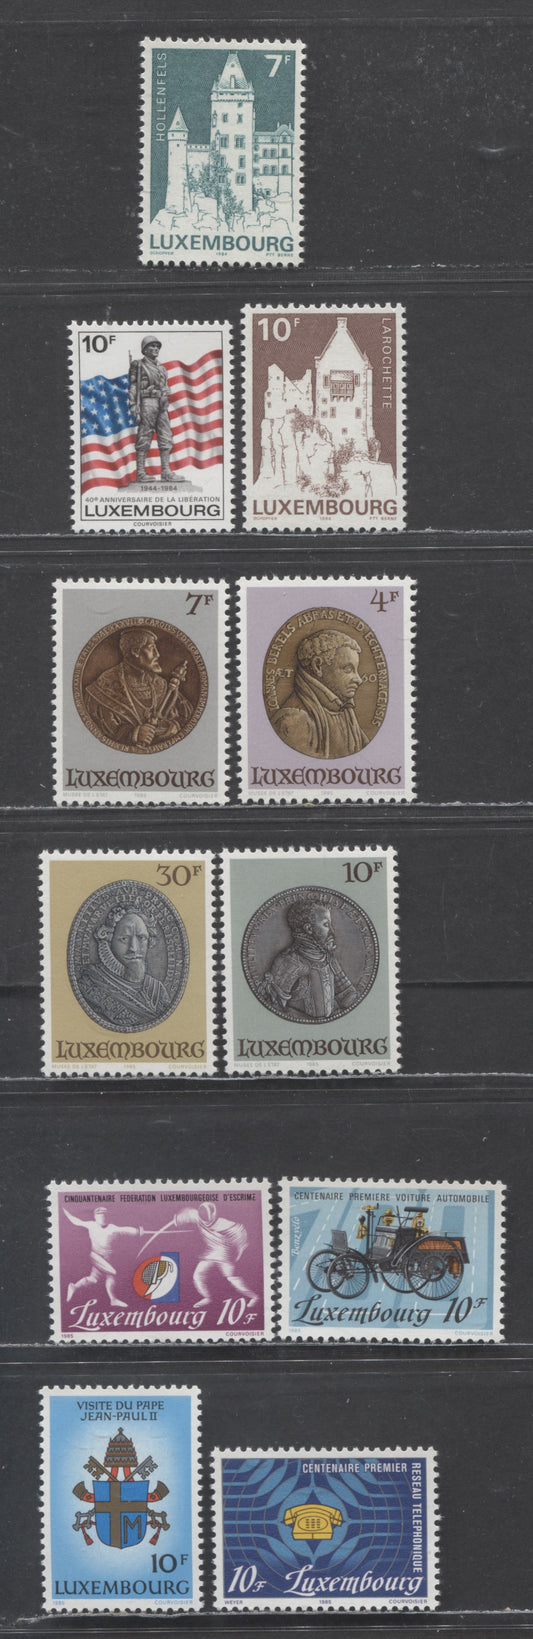 Luxembourg SC#718-728 1984-1985 Castles & Papal Visit Issues, 11 VFNH Singles, Click on Listing to See ALL Pictures, 2022 Scott Classic Cat. $8.1 USD